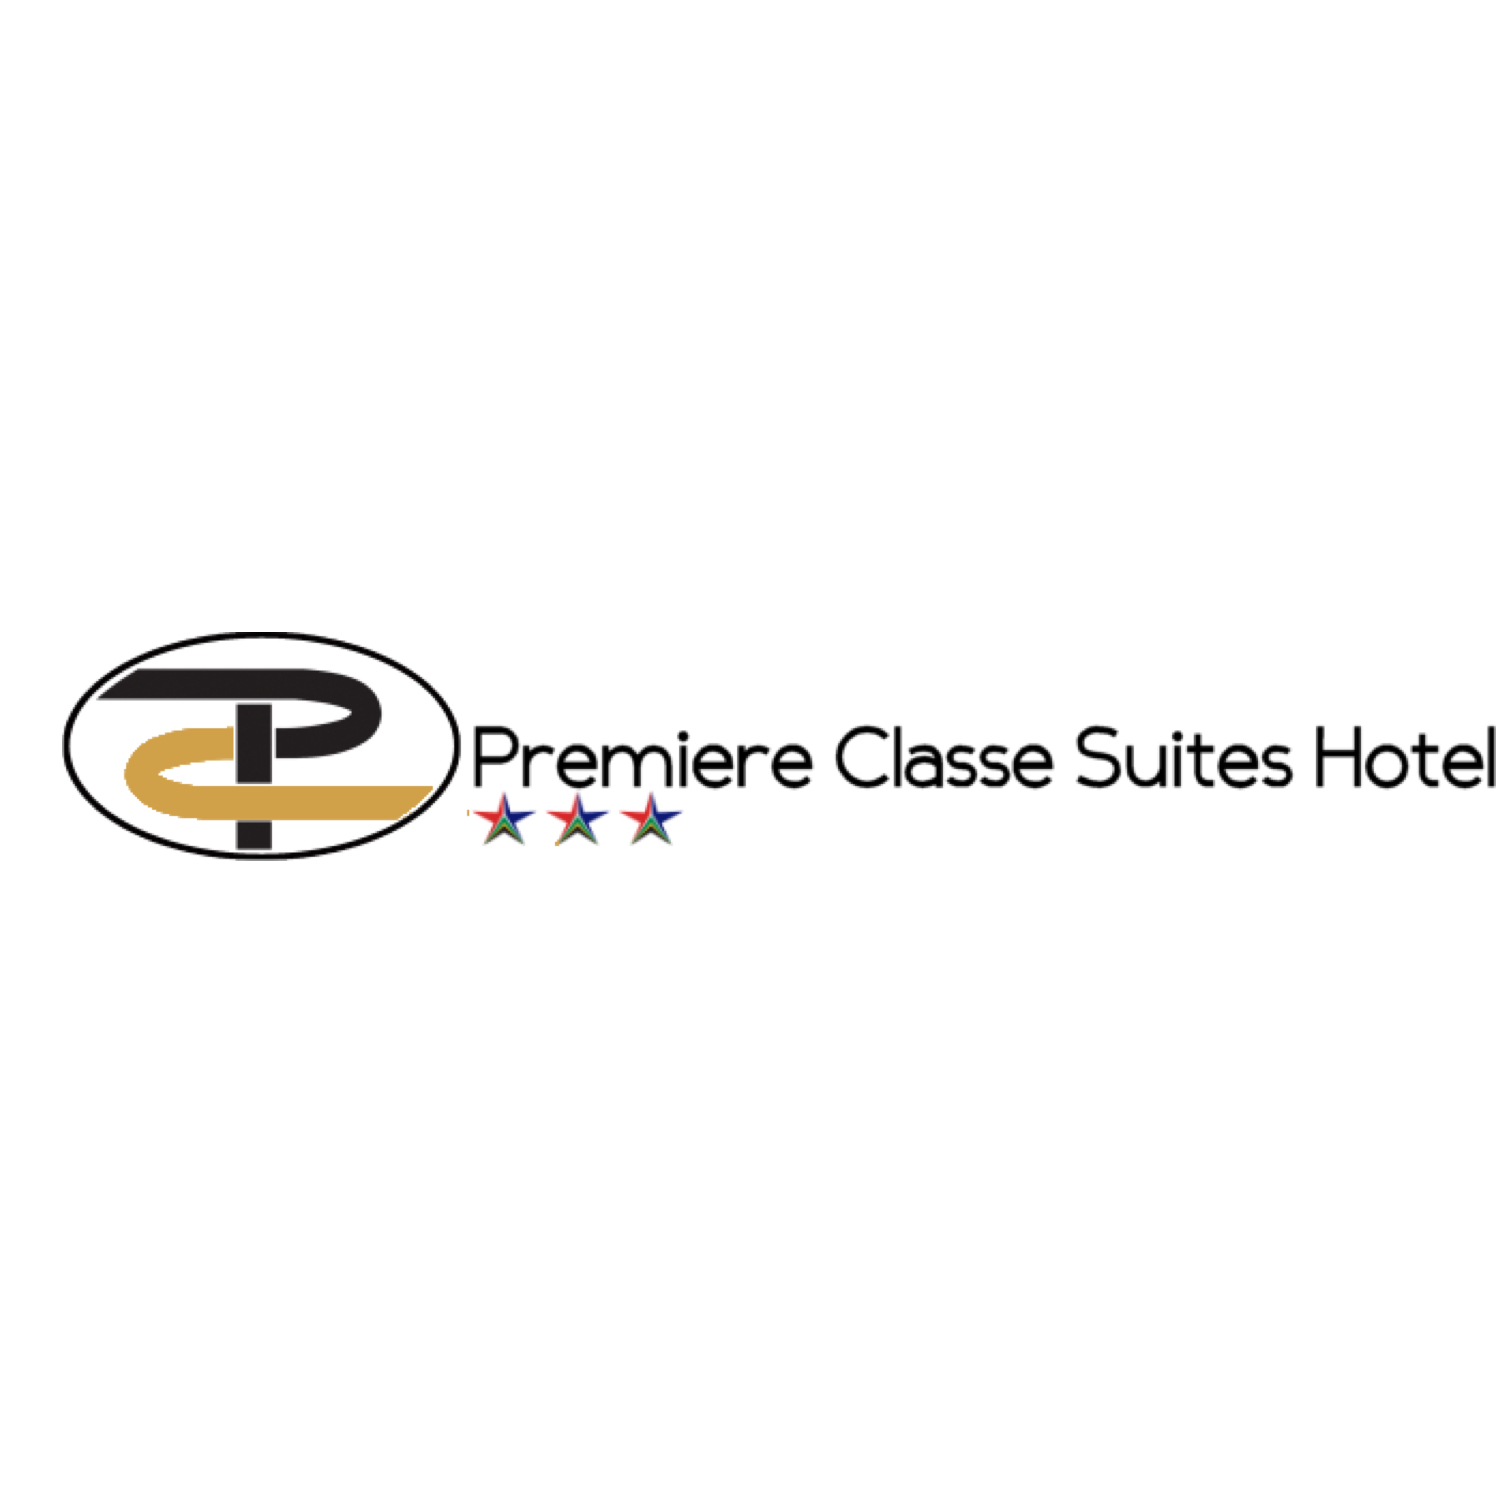 Premiere Classe Suites Hotel - South Africa